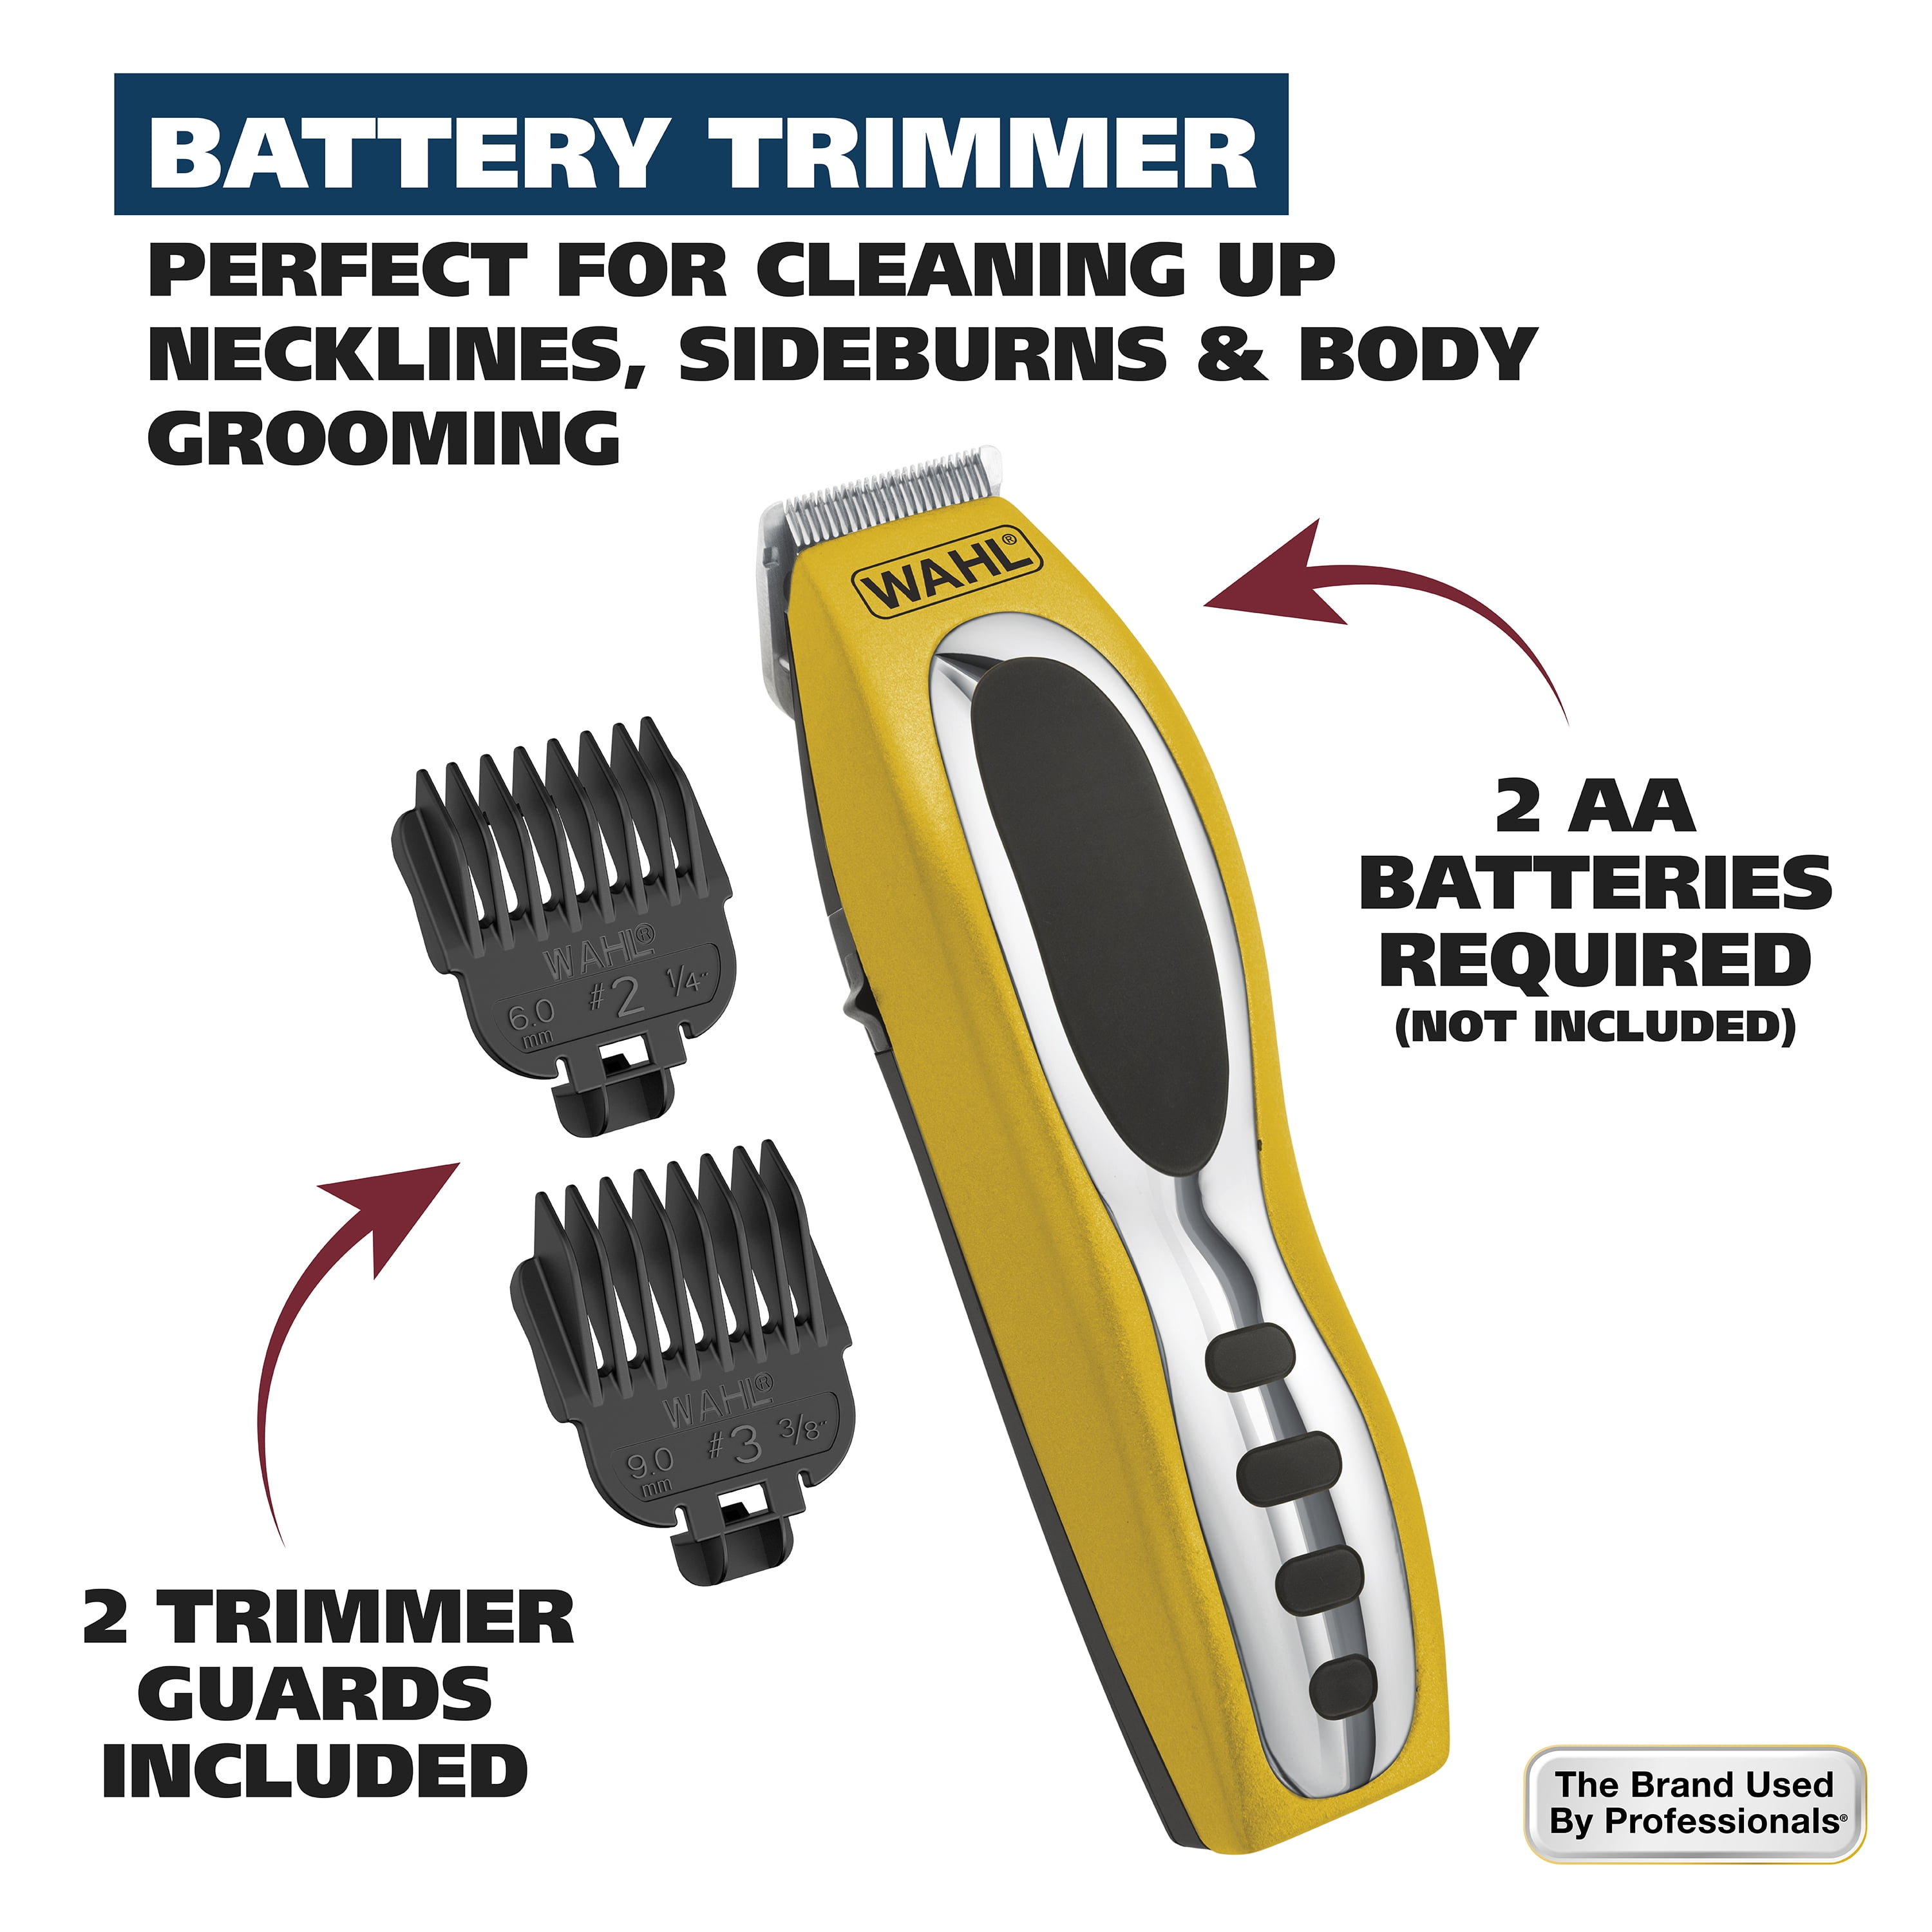 wahl 222206 900w hair trimmers yellow